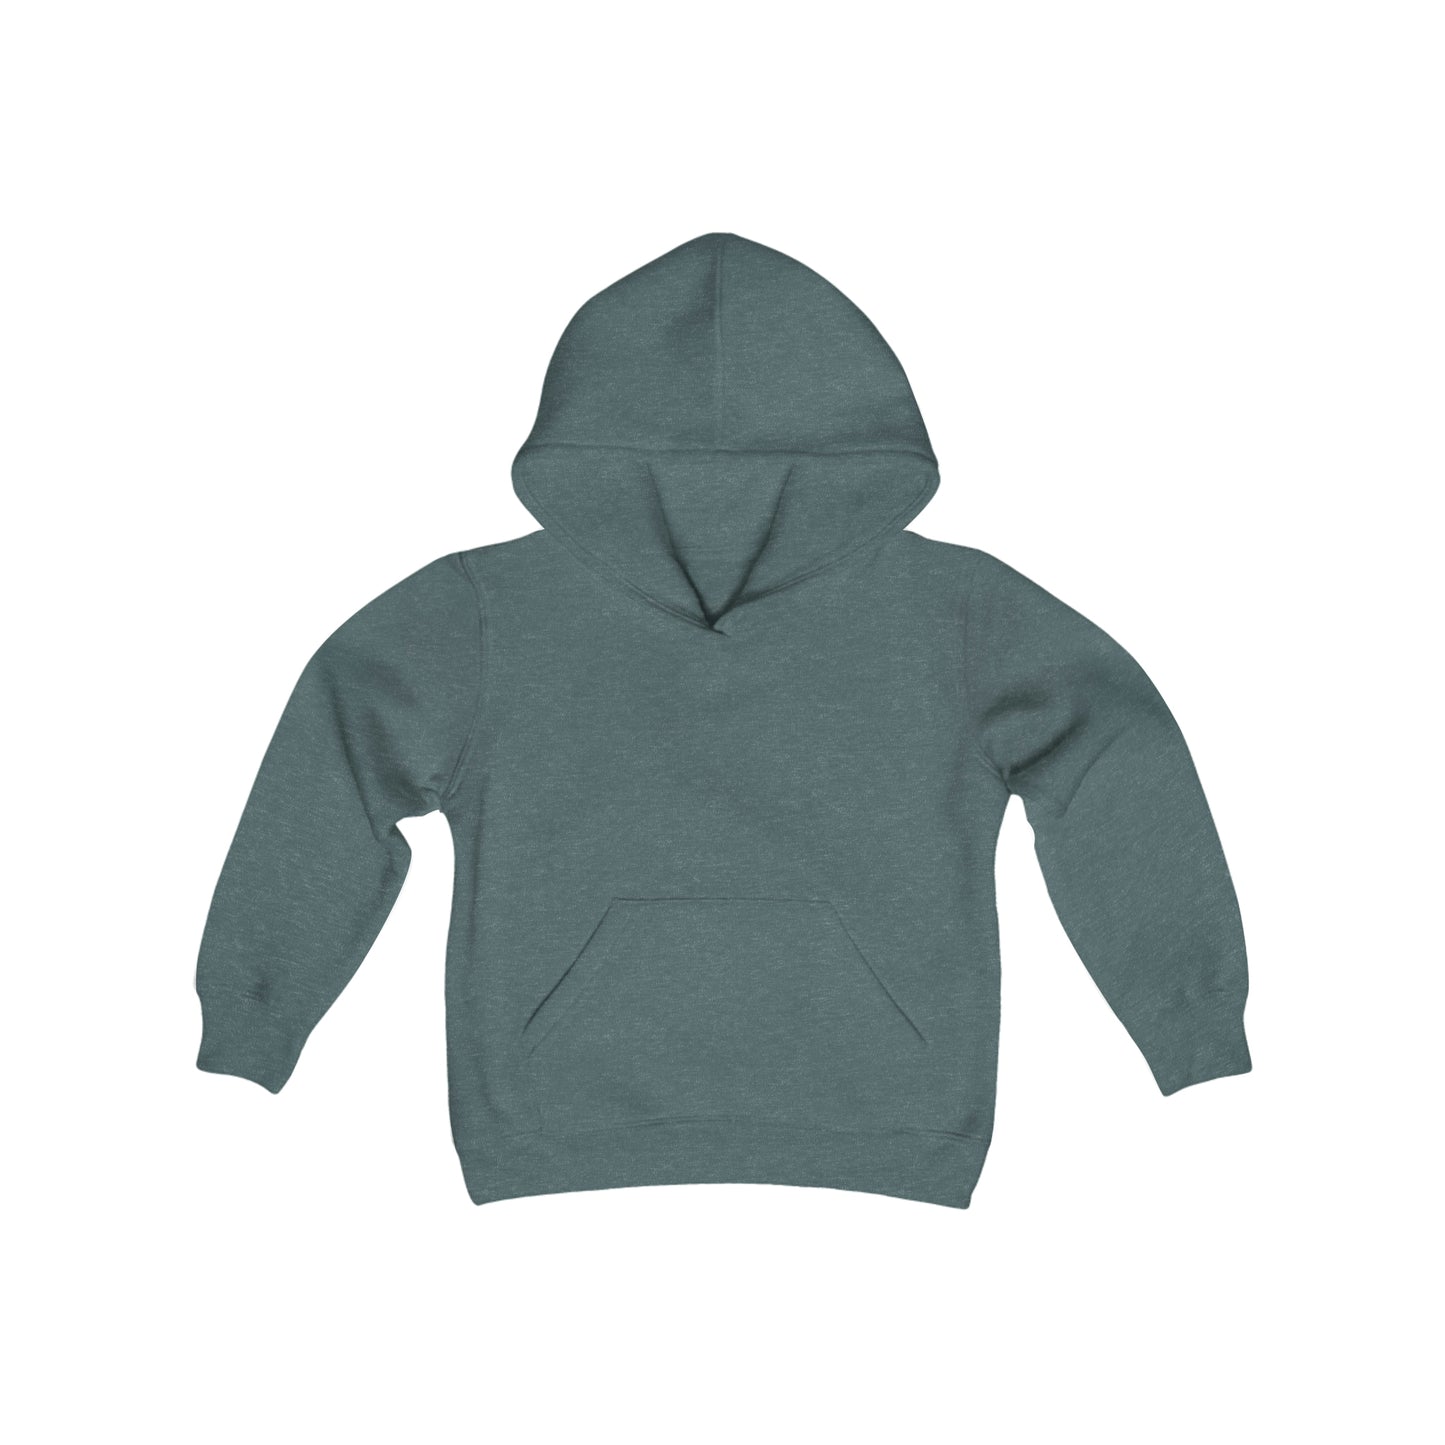 Youth Heavy Blend Hoodie | QCRFC Frogs Logo